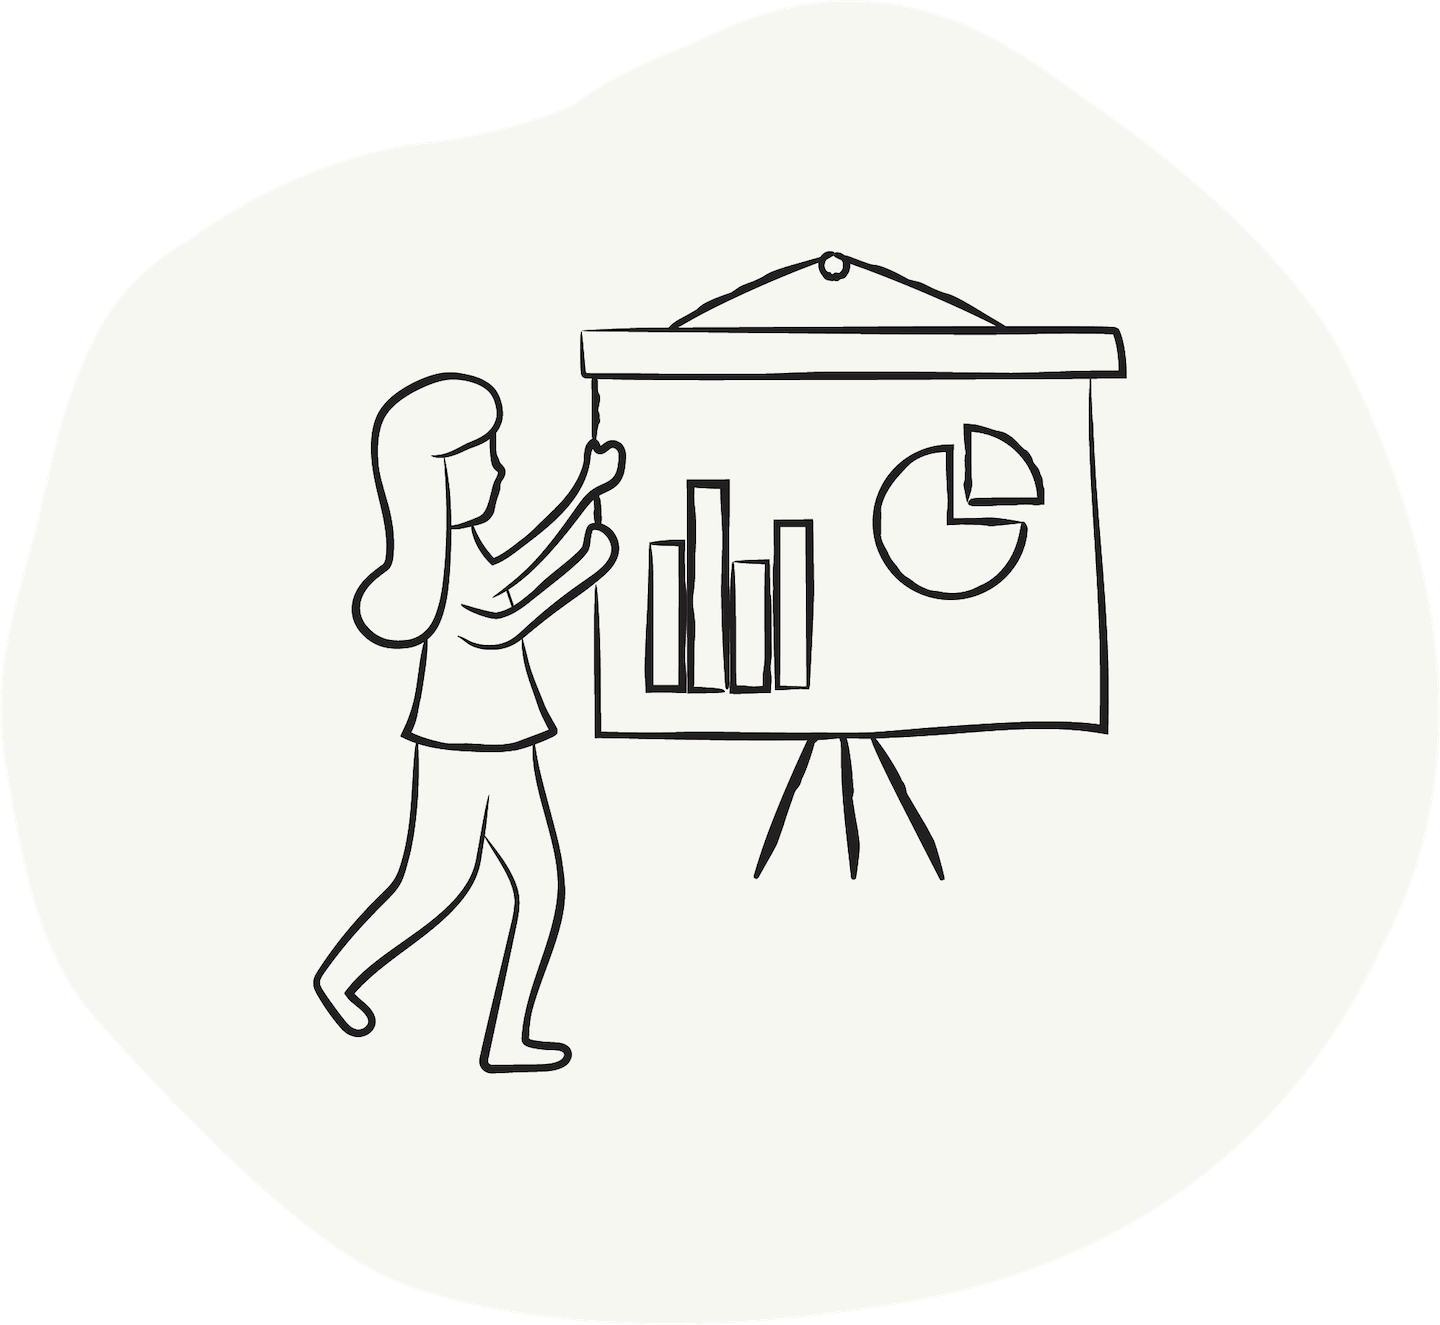 An illustration of a person presenting survey results on a poster with bar charts and pie graphs